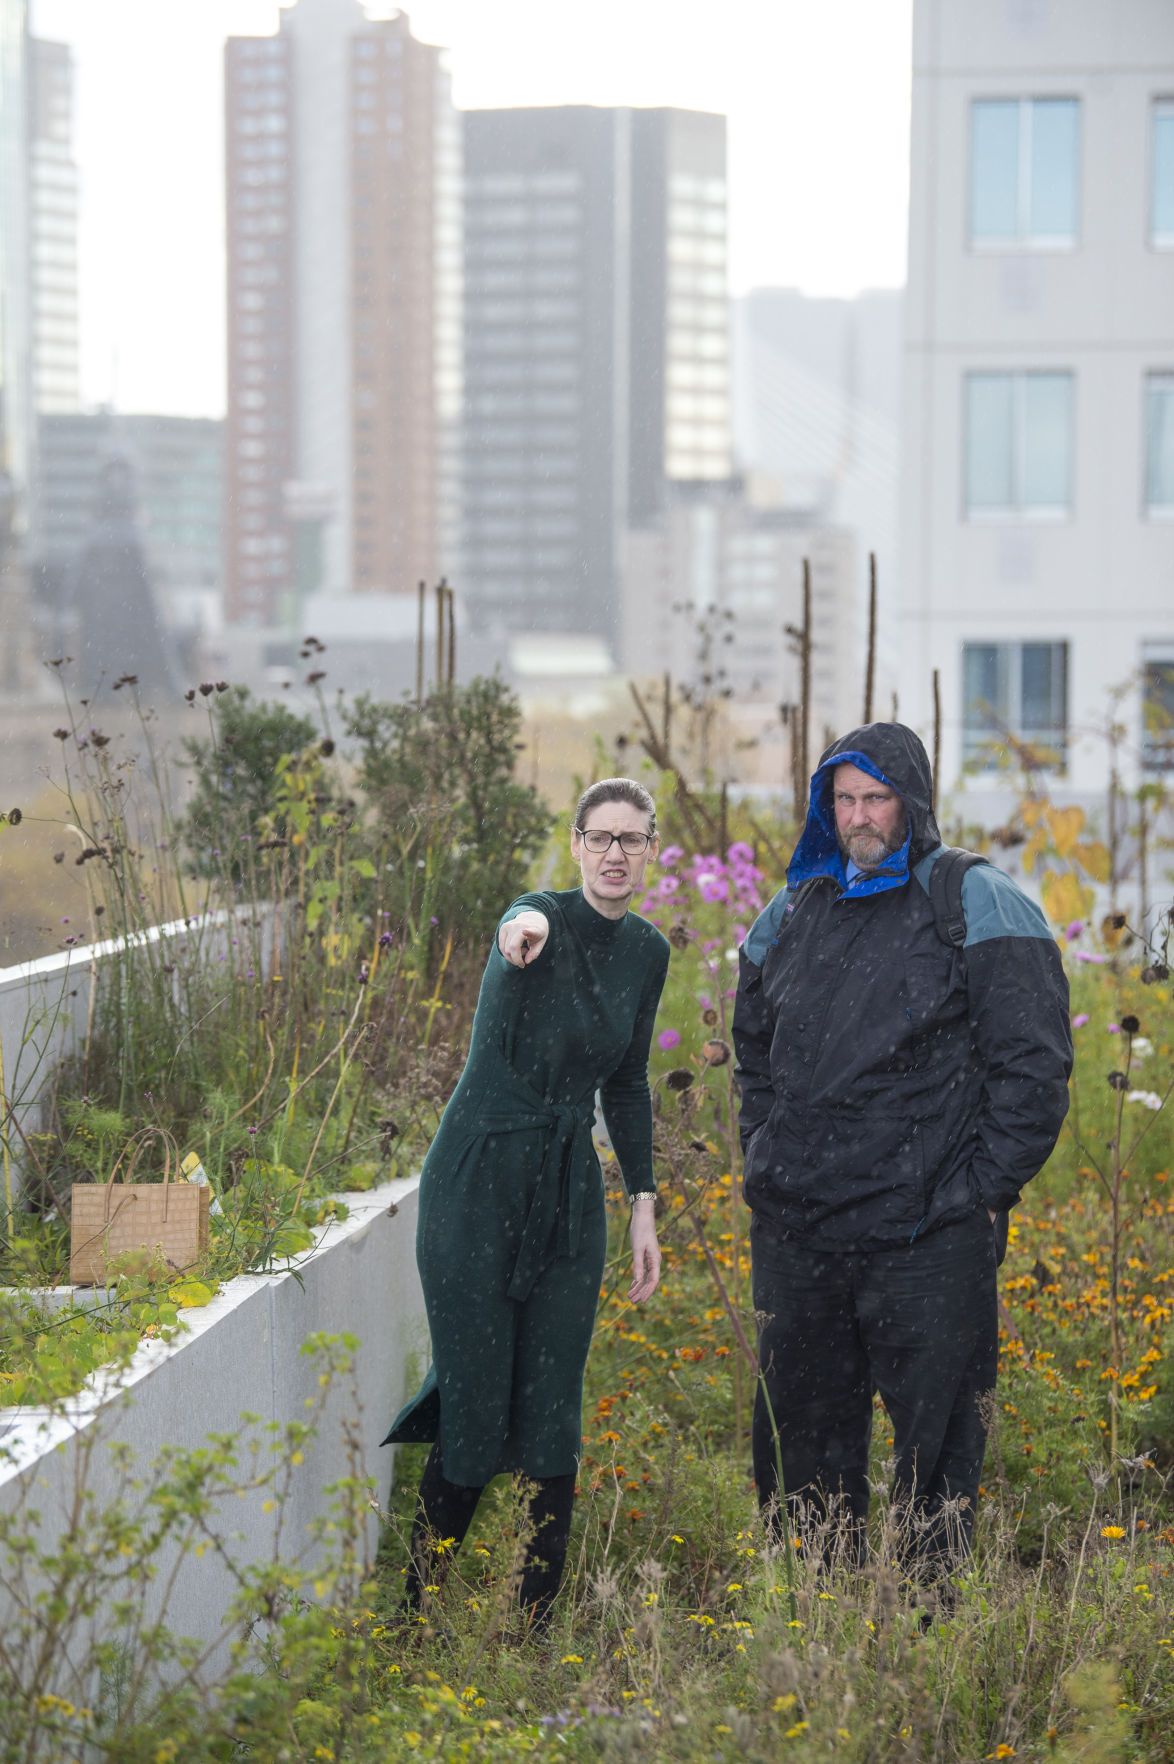 Eveline Bronswijk, left, with the city of Rotterdam, discusses a green roof that grows food for a restaurant. Image by Chris Granger. Netherlands, 2019.